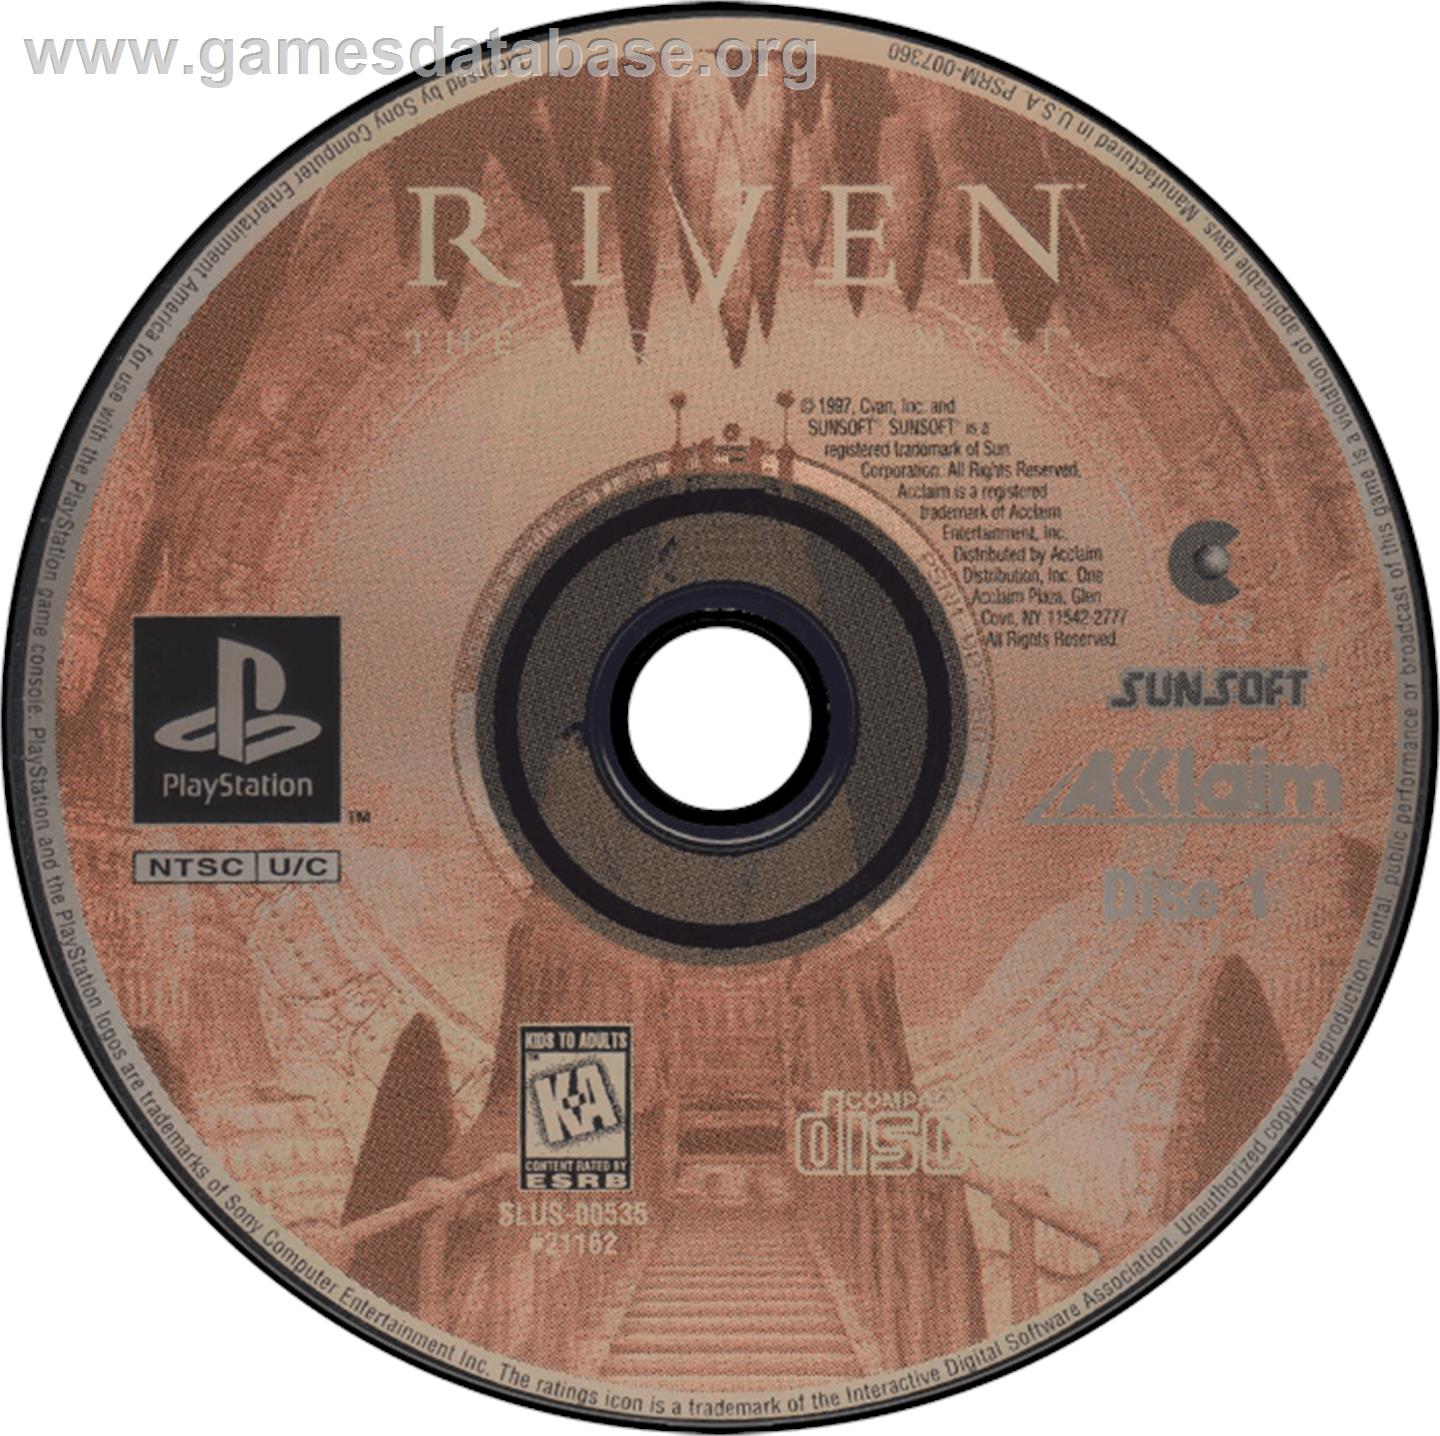 Riven: The Sequel to Myst - Sony Playstation - Artwork - Disc